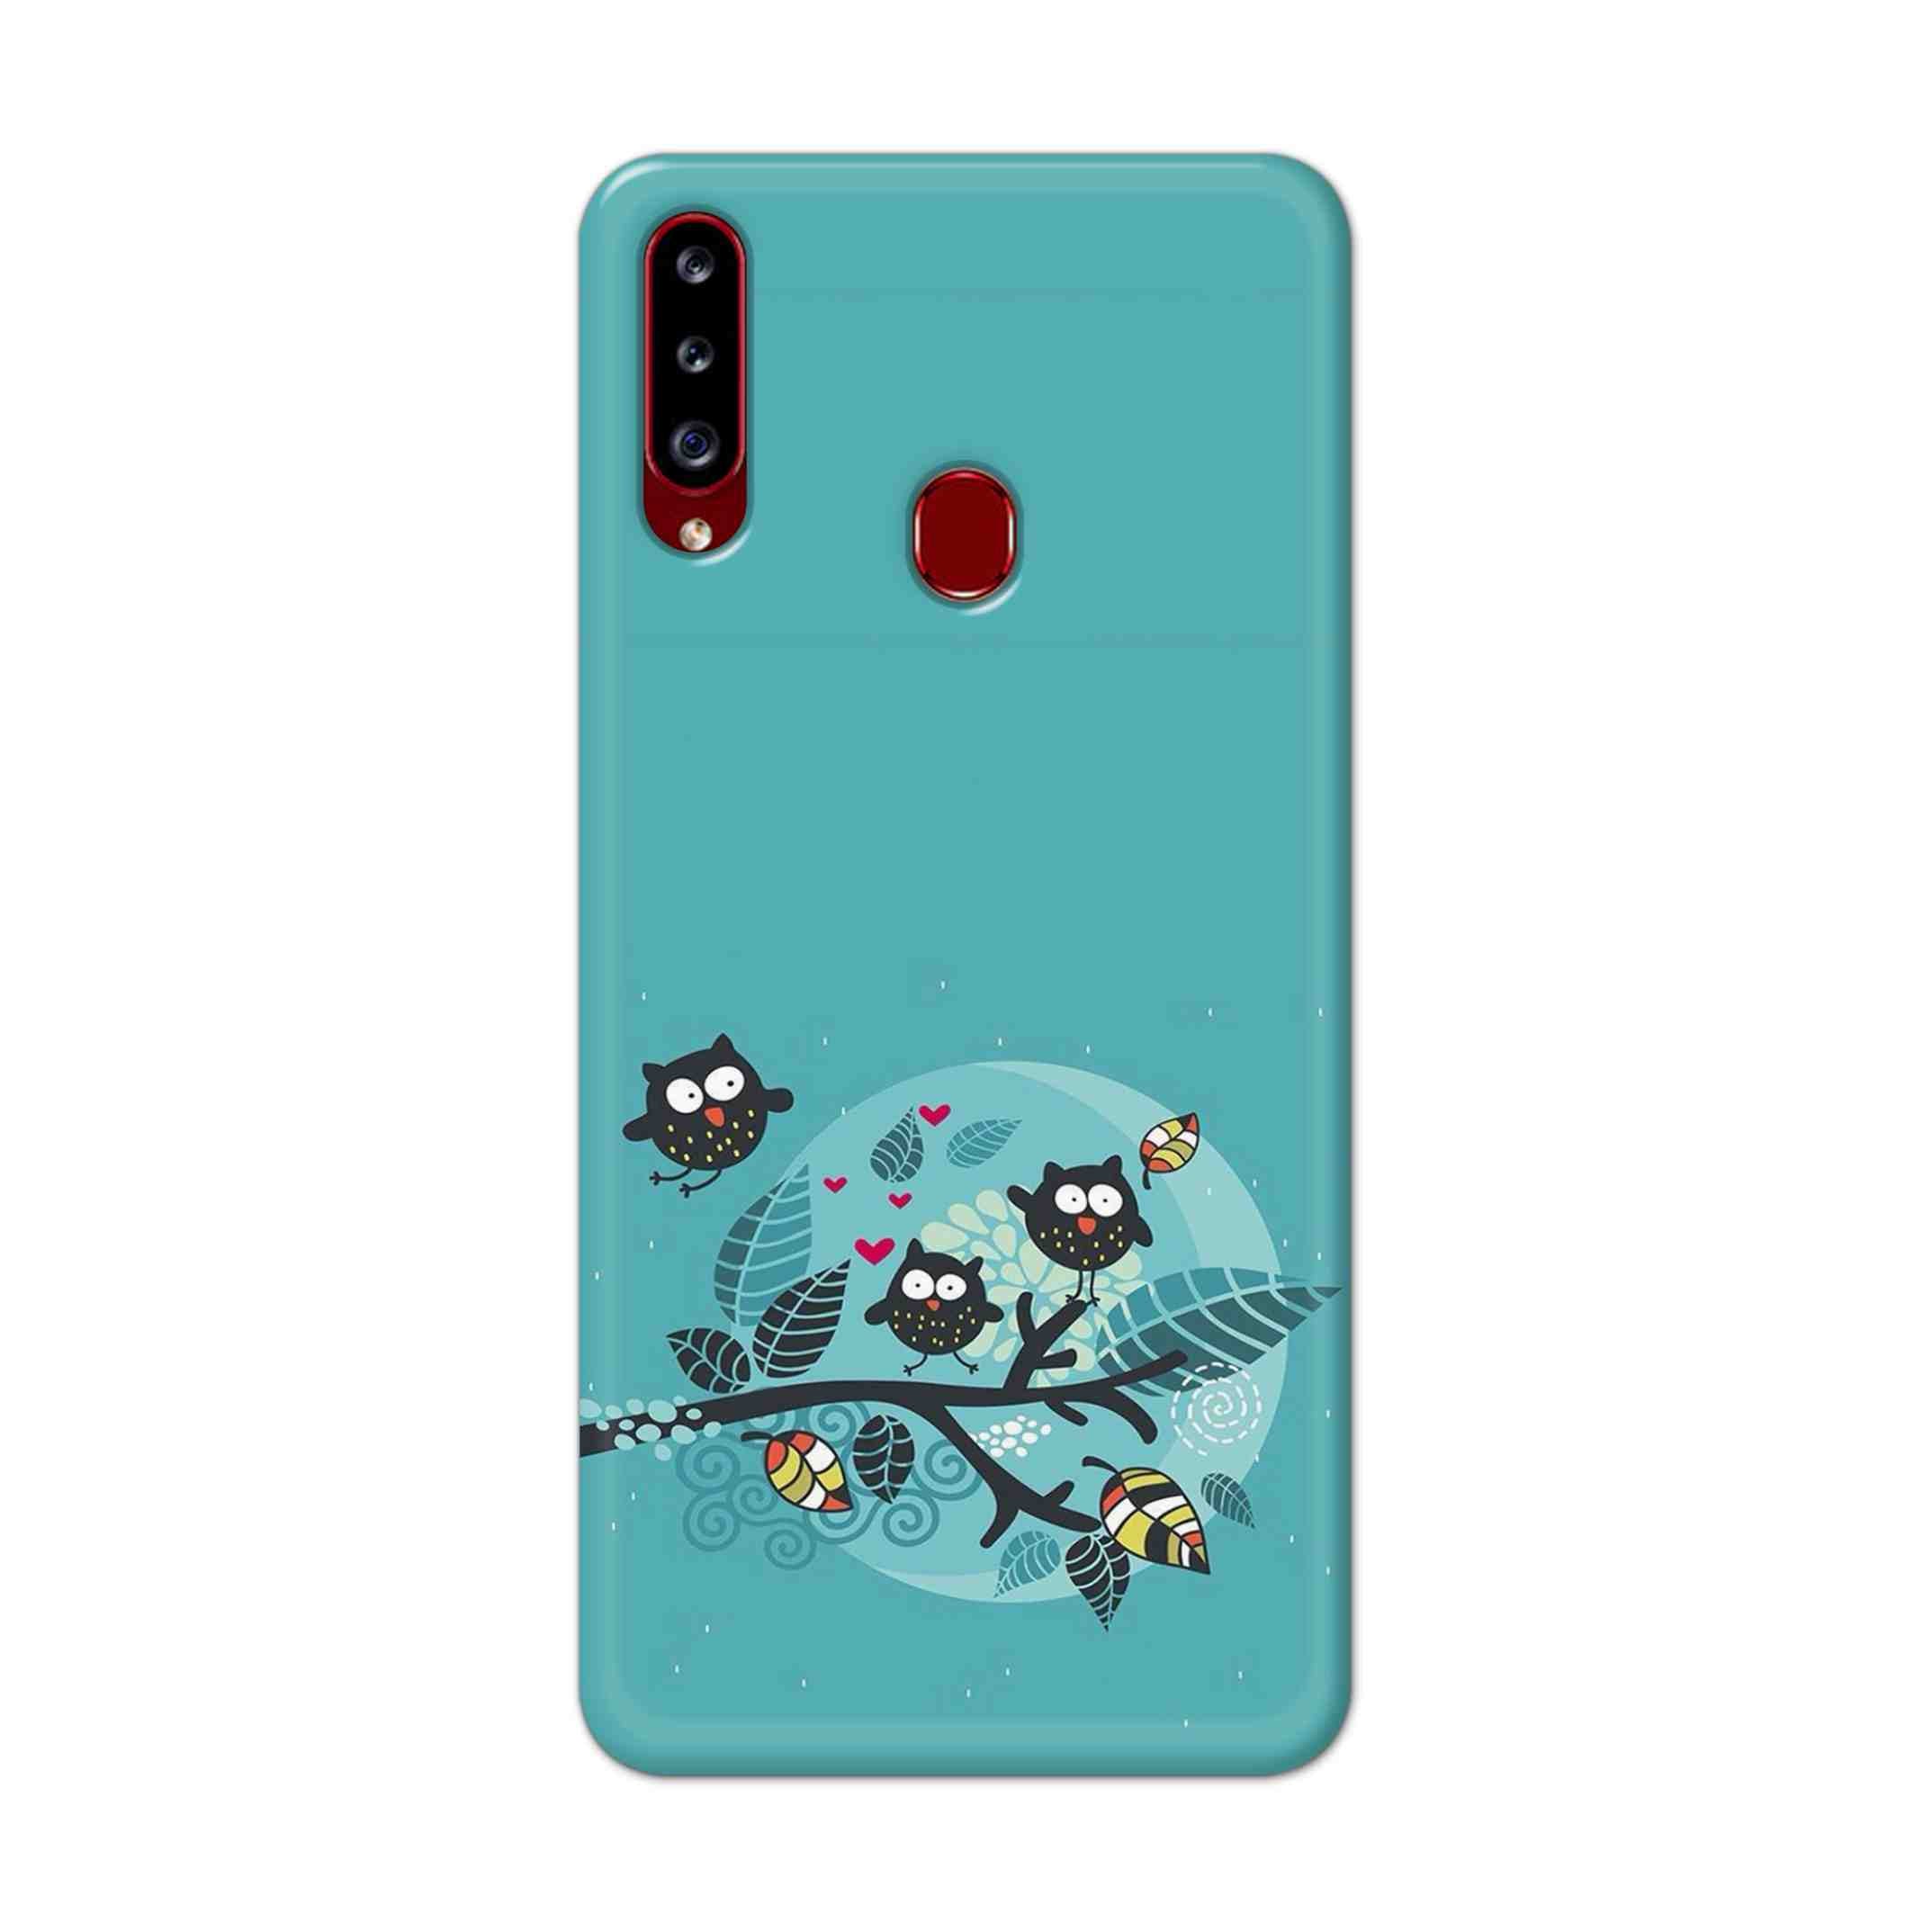 Buy Owl Hard Back Mobile Phone Case Cover For Samsung A20s Online